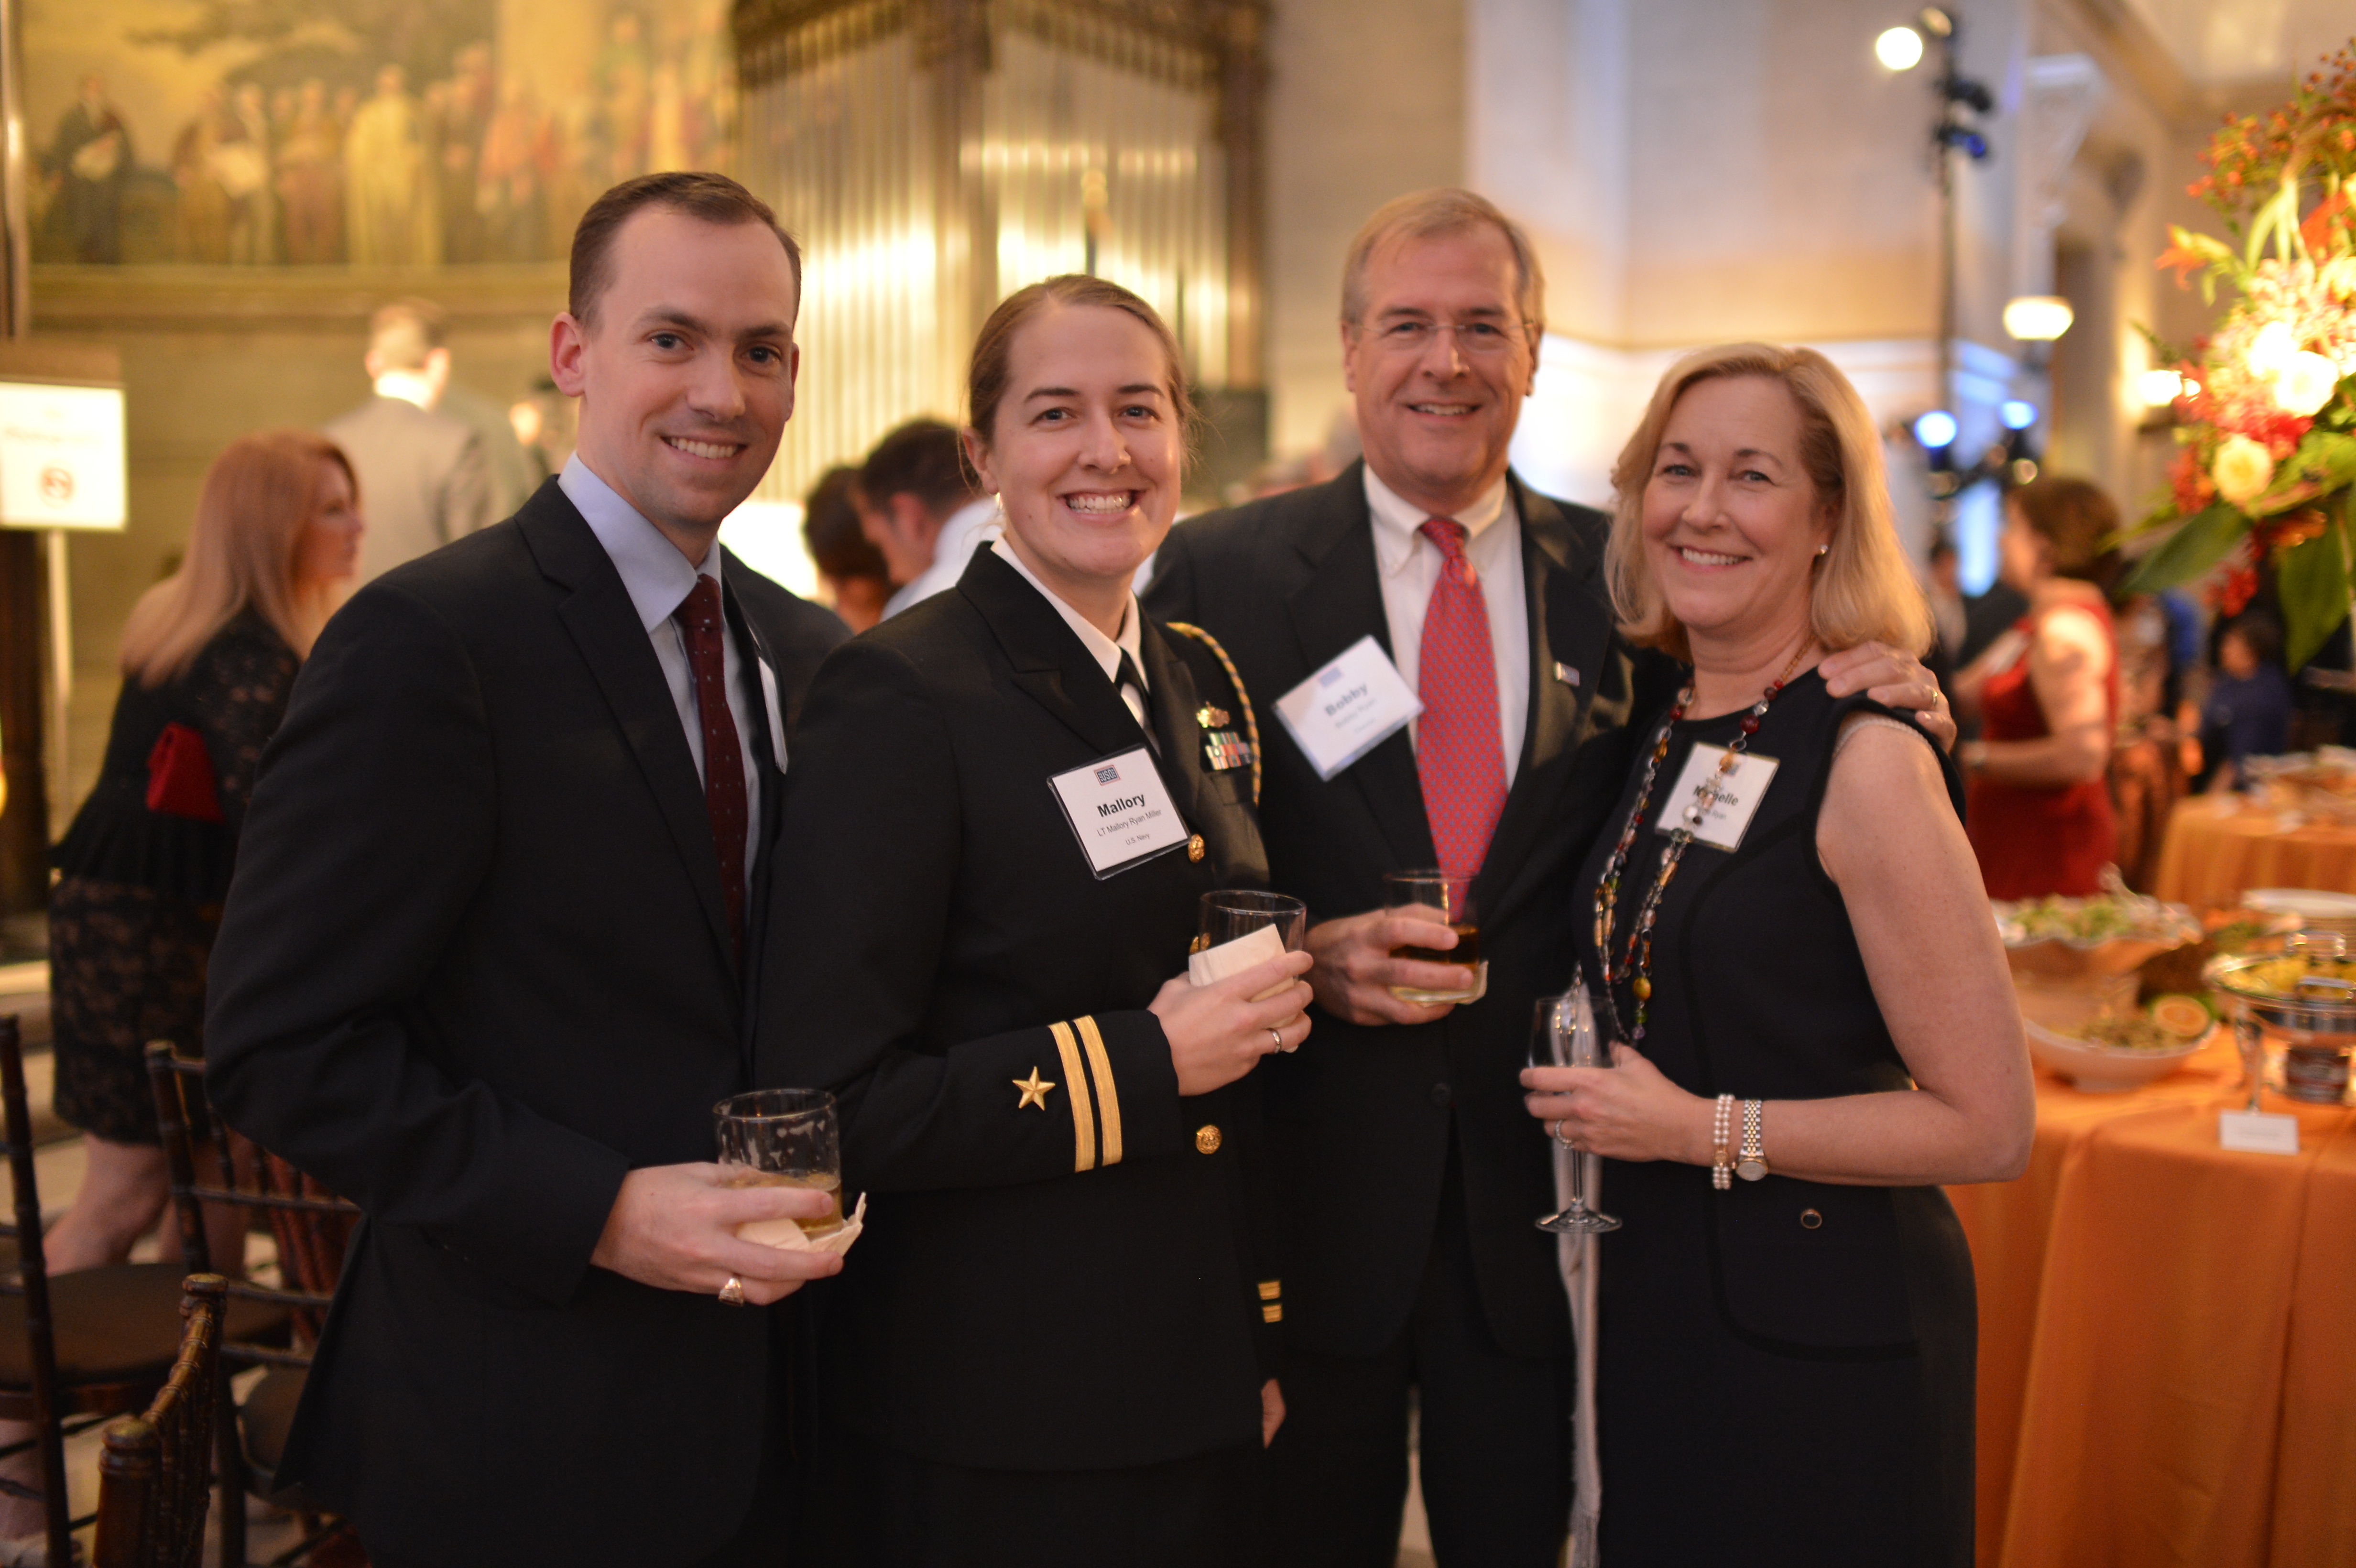 Inside the USO Gala’s Private Chairman’s Reception